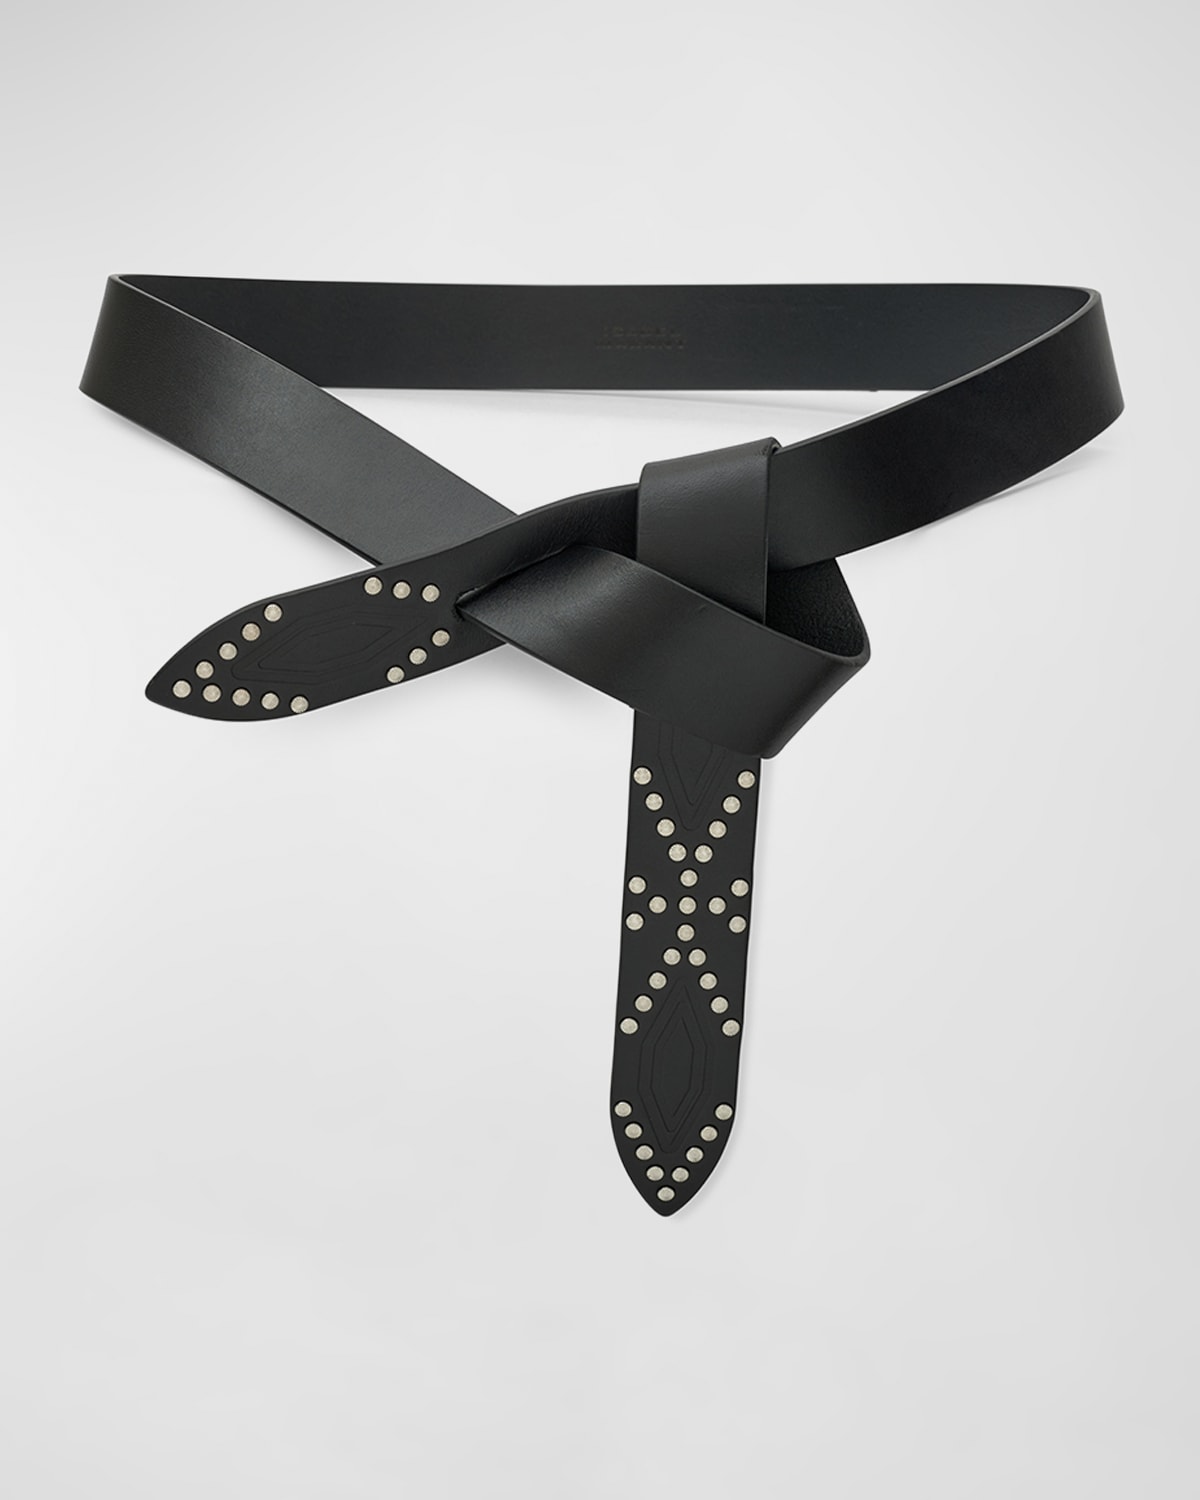 Isabel Marant Lecce Leather Pull-Through Belt | Neiman Marcus